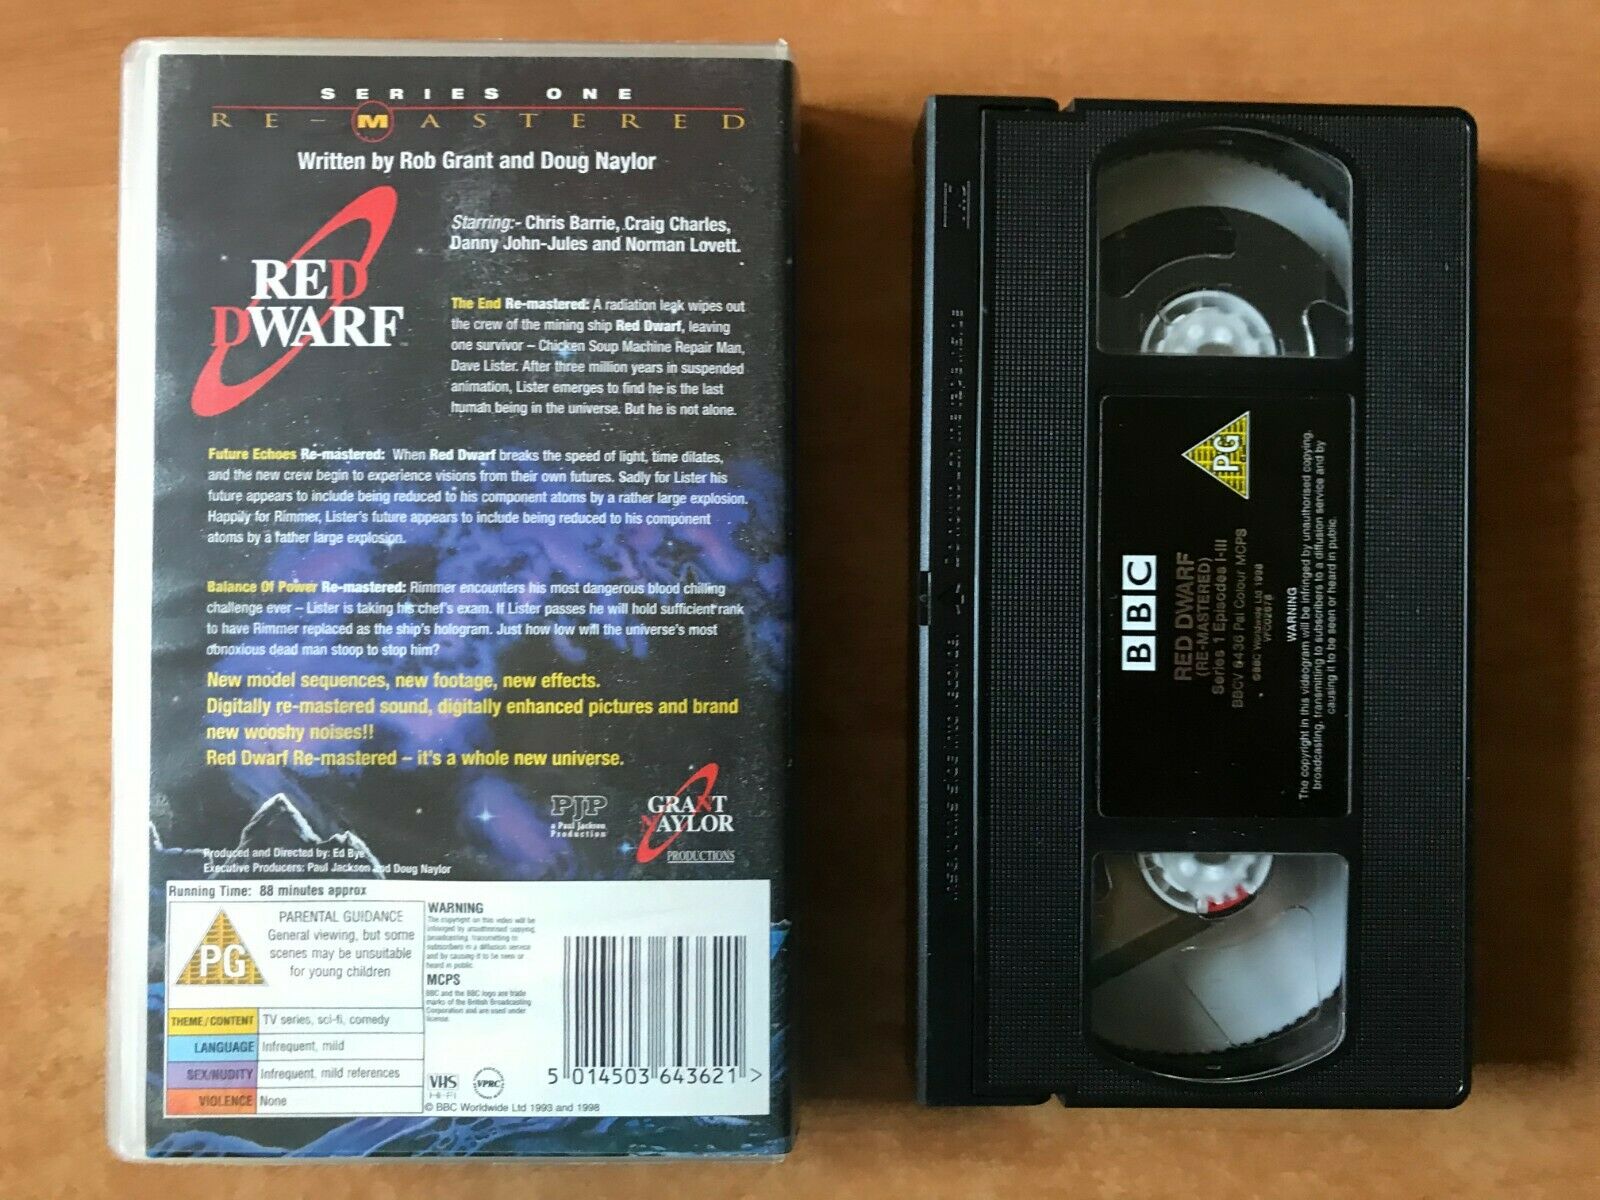 Red Dwarf: Series One, Episodes 1-3 [Remastered] Sci-Fi Comedy Franchise - VHS-